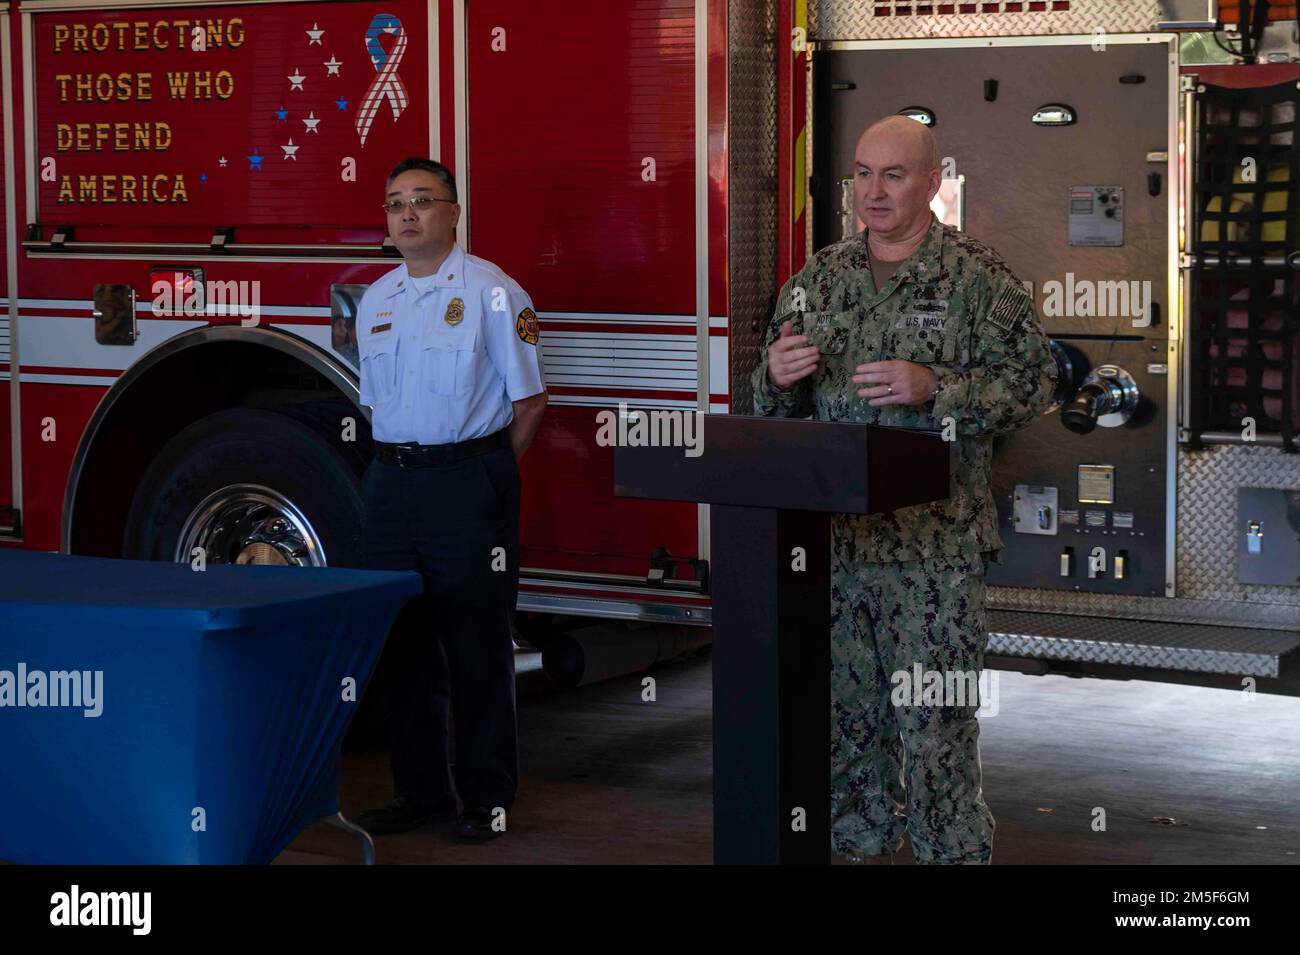 220310-N-OT701-1058 SCHOFIELD BARRACKS (March 10, 2022) Rear Adm. Timothy Kott, commander, Navy Region Hawaii (CNRH), speaks during a ceremony held at Federal Fire Department Fire Station 15 on Schofield Barracks. CNRH District 2 North was recognized for being named the 2021 Navy Medium Fire Department of the Year. Stock Photo